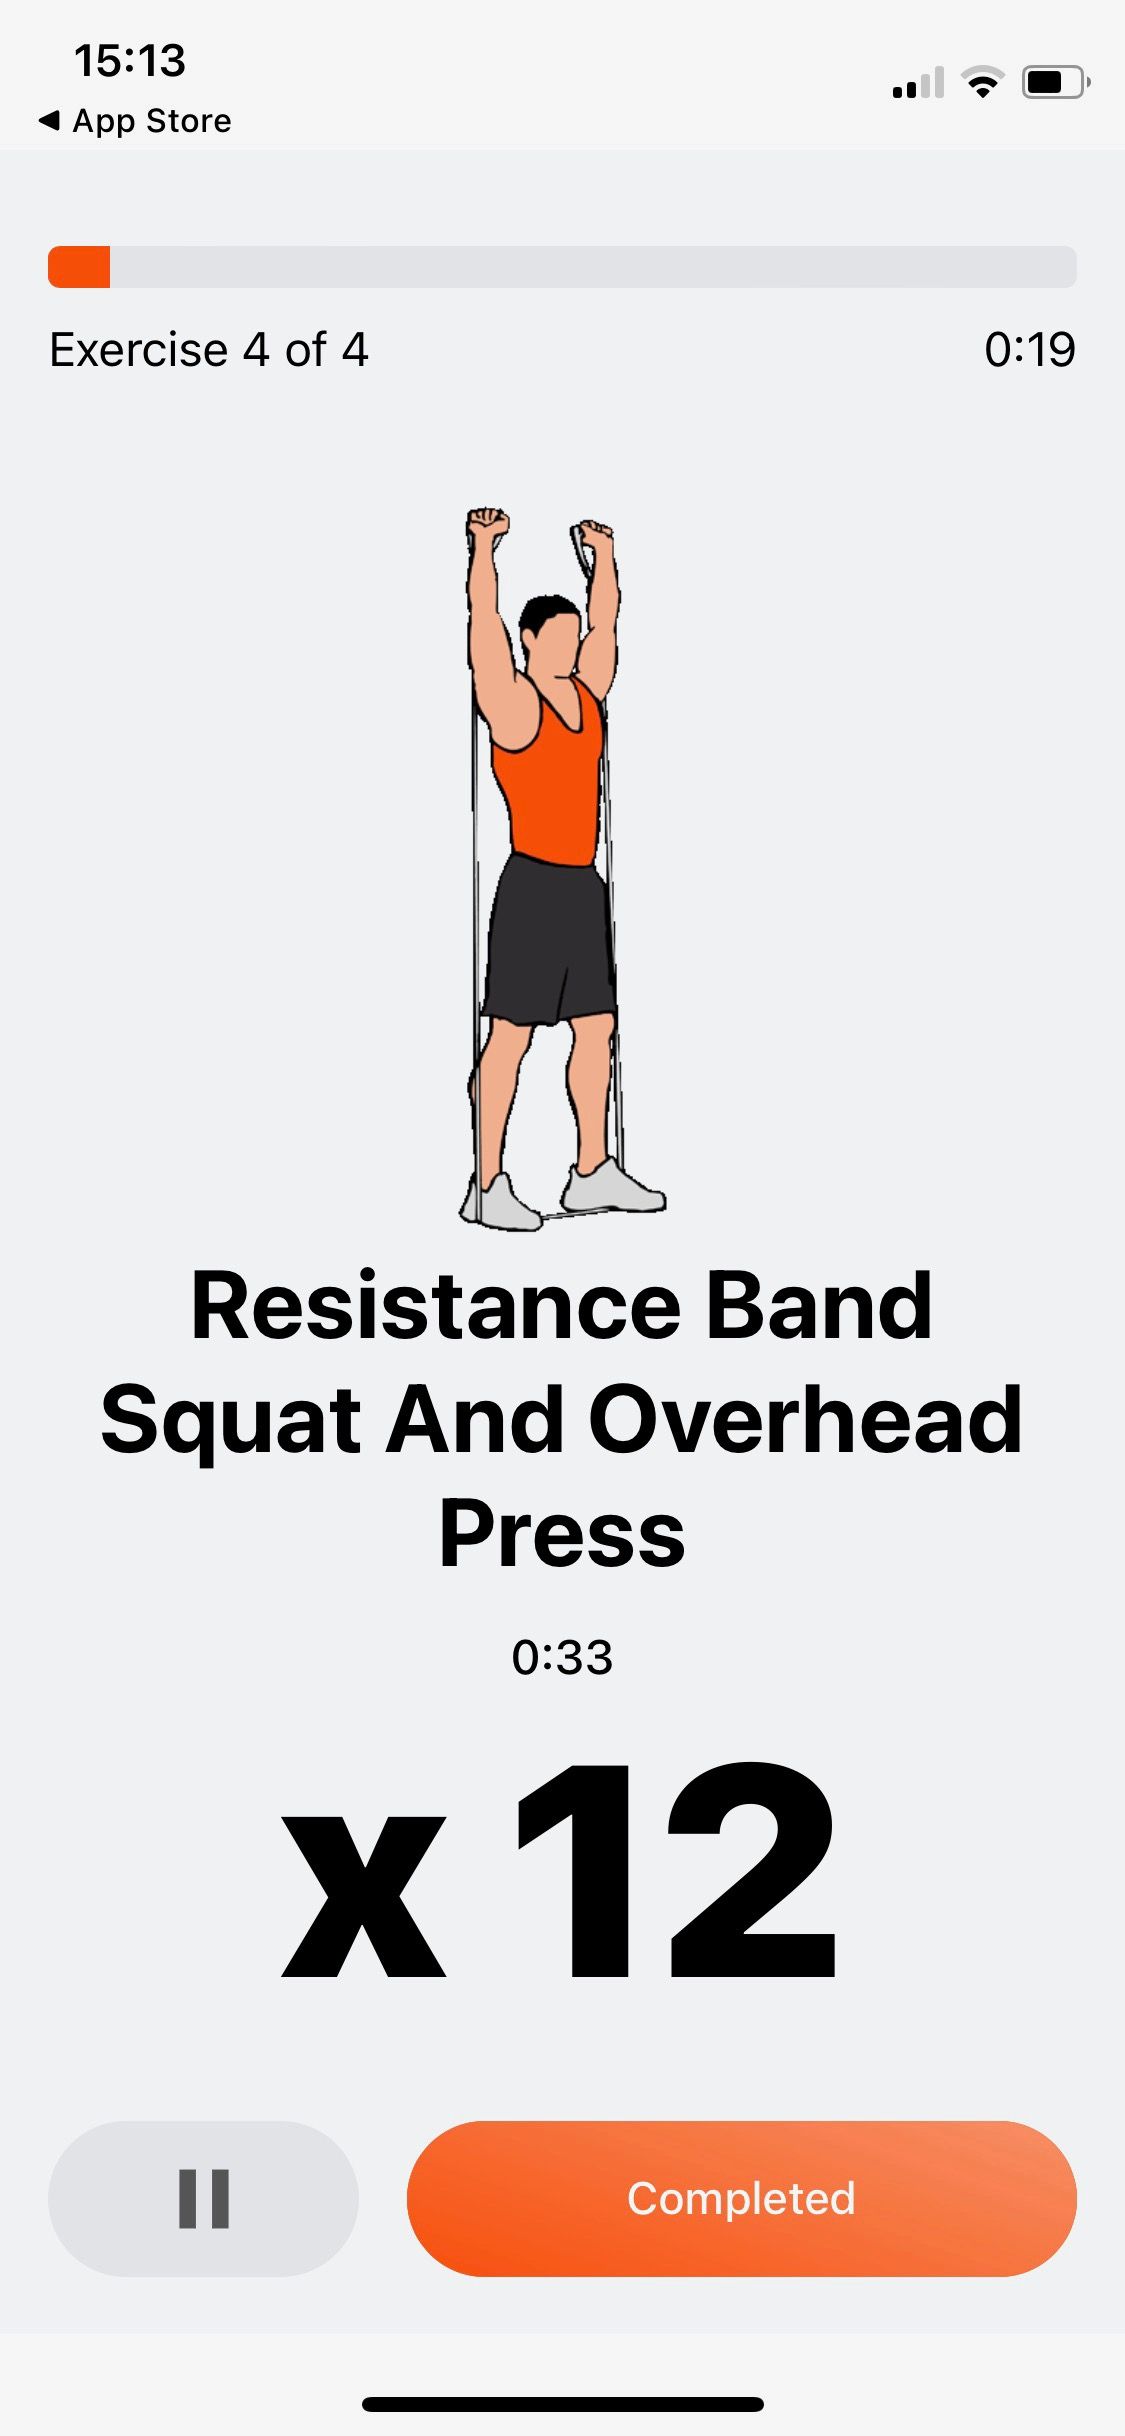 5 Resistance Band Workout Apps For A Cheap Simple And Effective At Home Workout